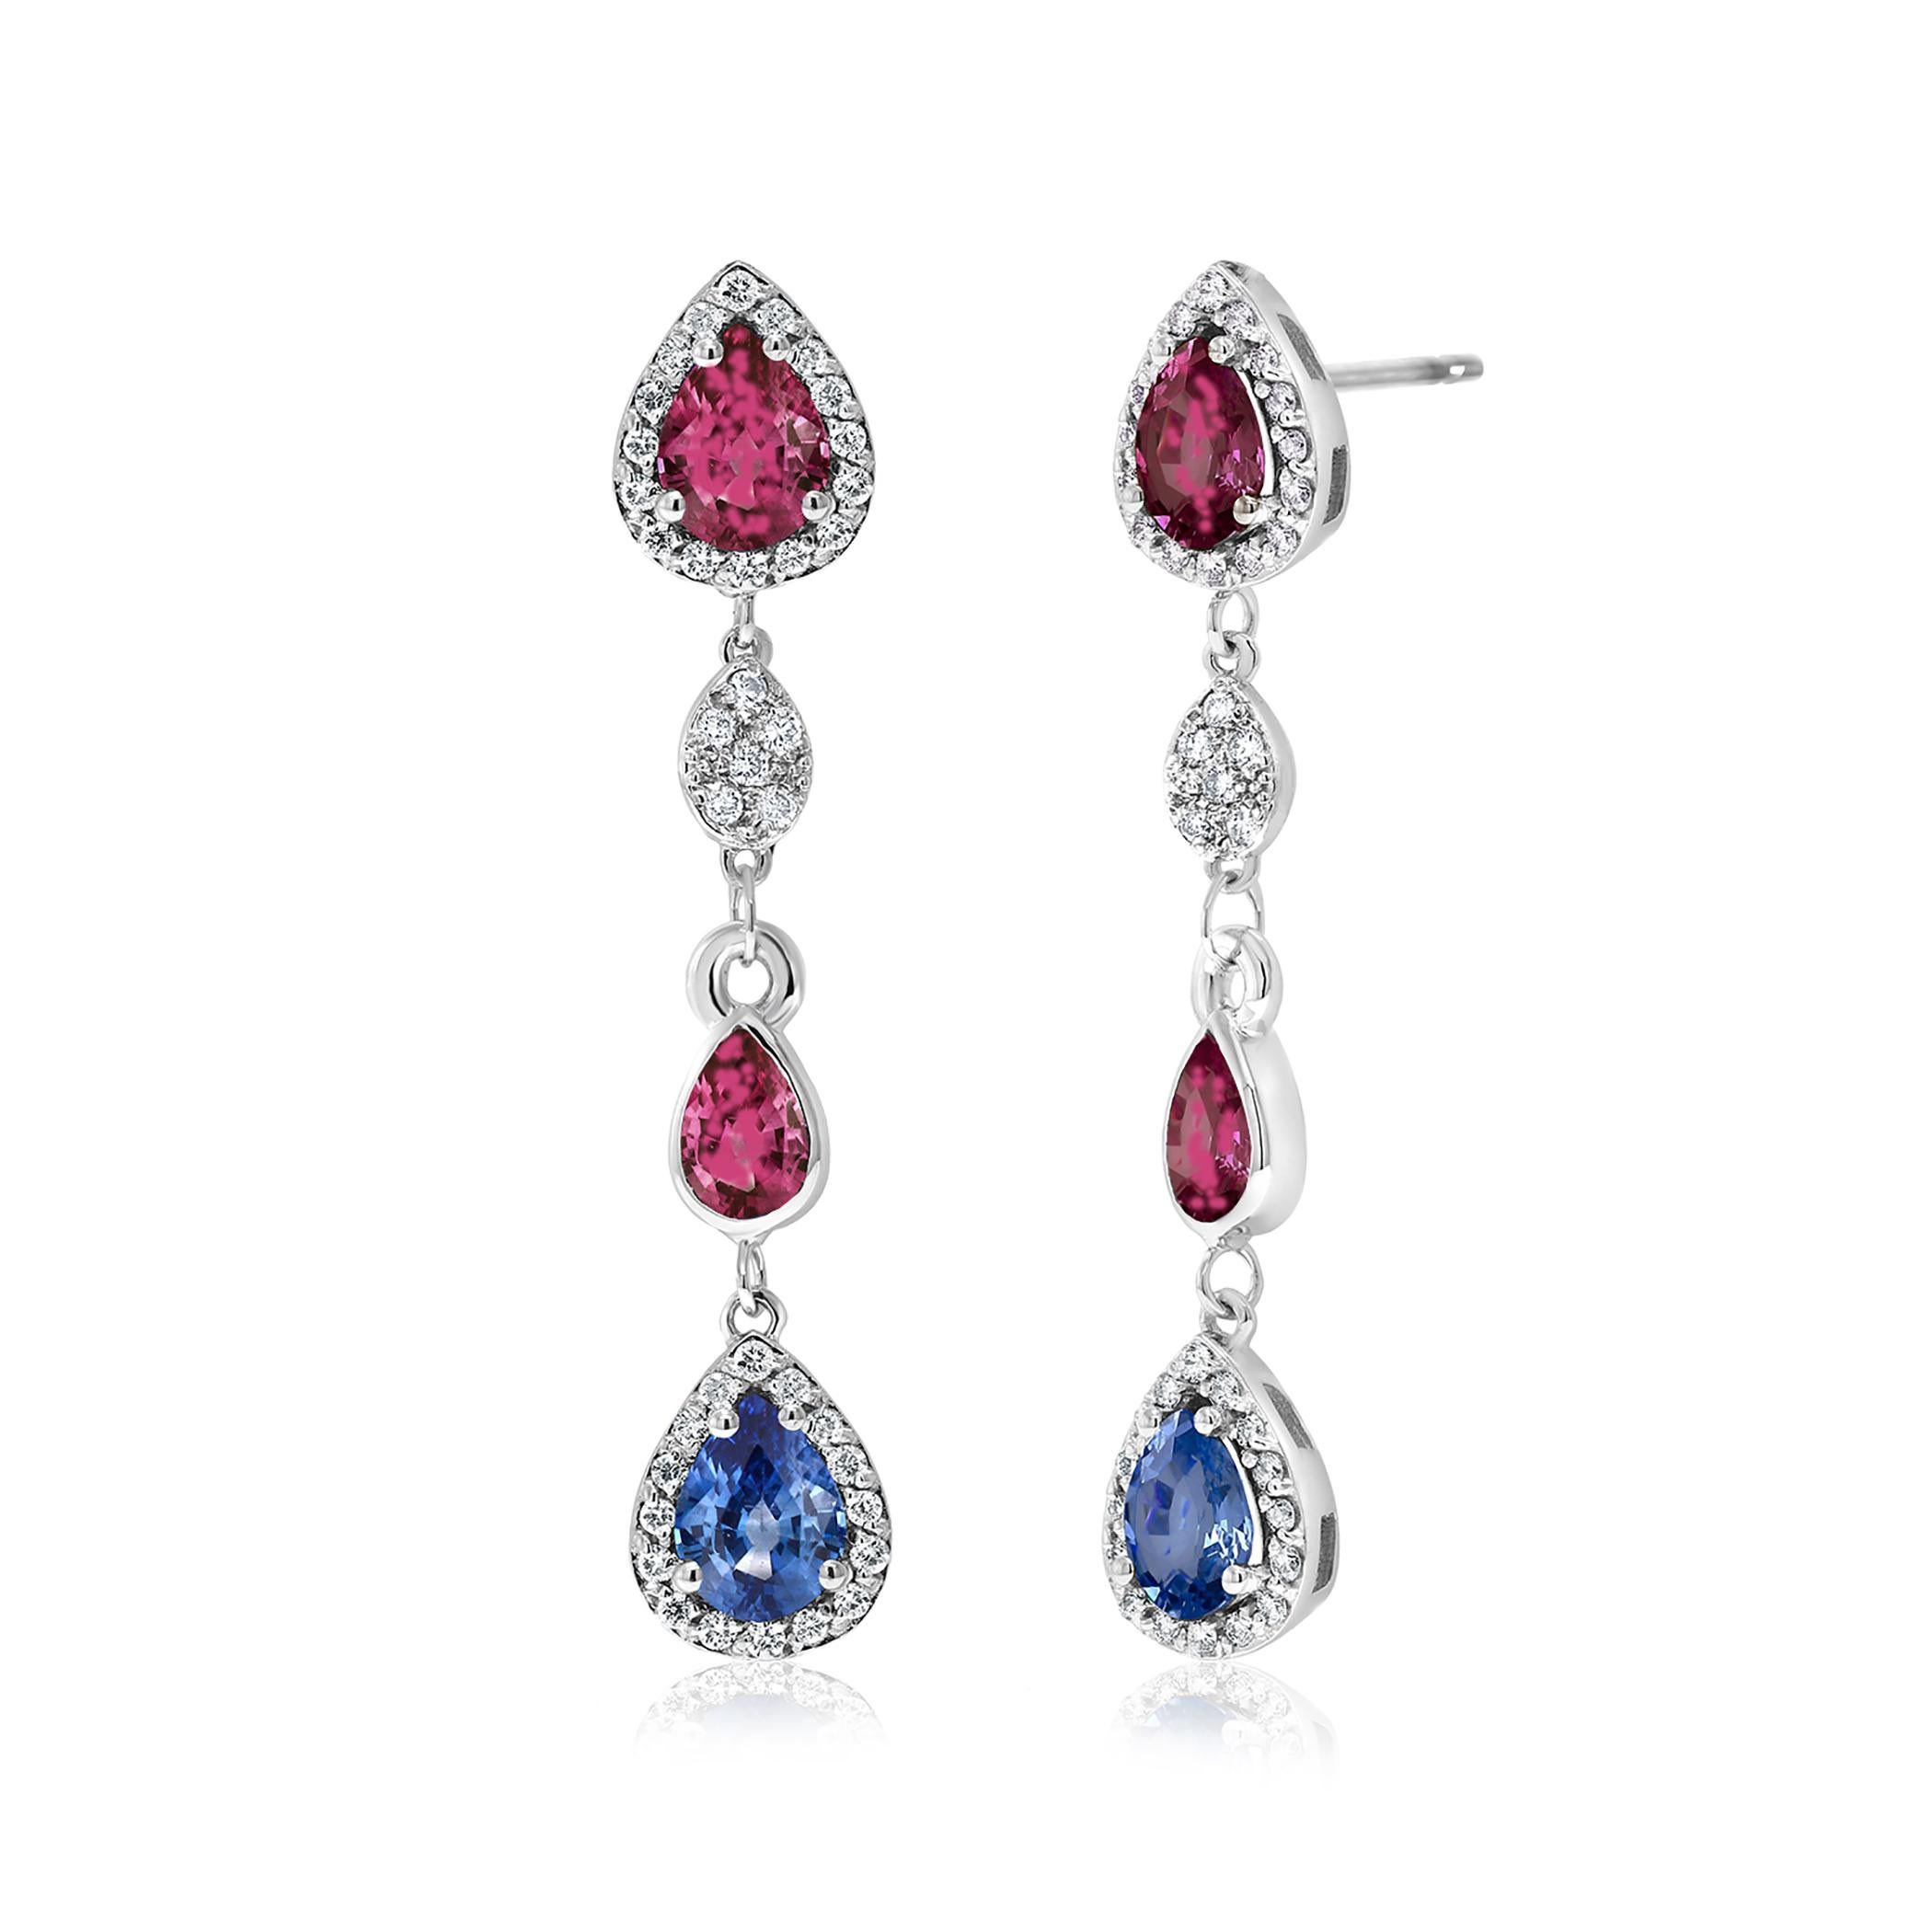 Women's Diamond Earrings with Ruby and Sapphire Drops Weighing 4.96 Carat 